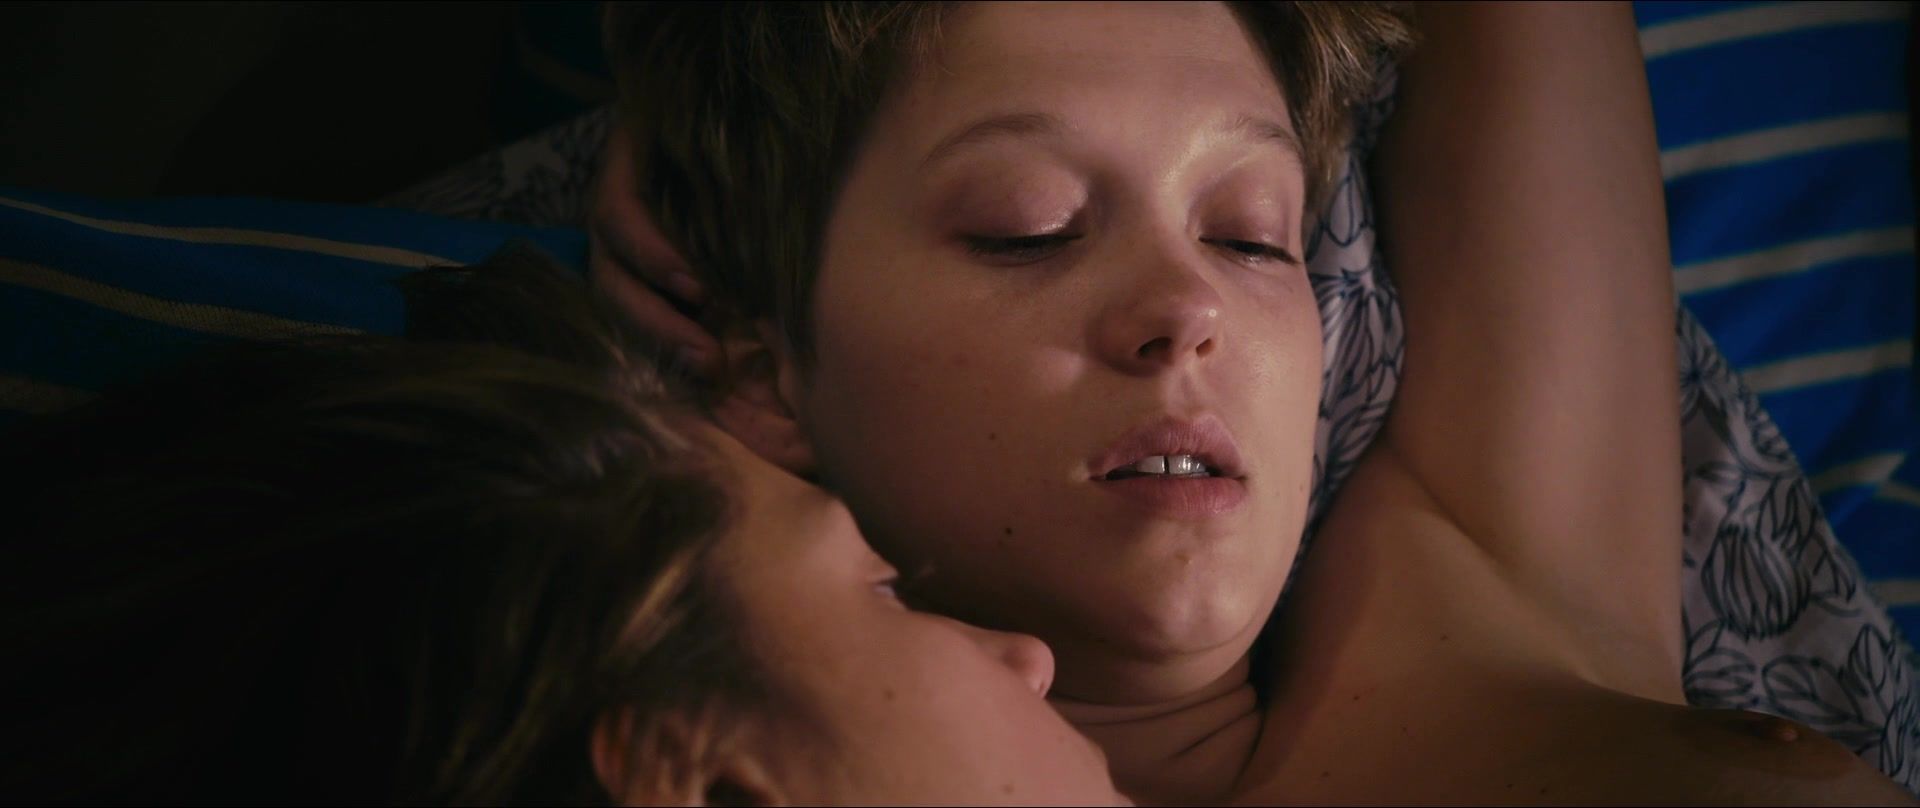 Handjob Best lesbian scene in movies | Adele Exarchopoulos nude & Léa Seydoux naked | The film "Blue Is The Warmest Color" (2013) Free Fuck